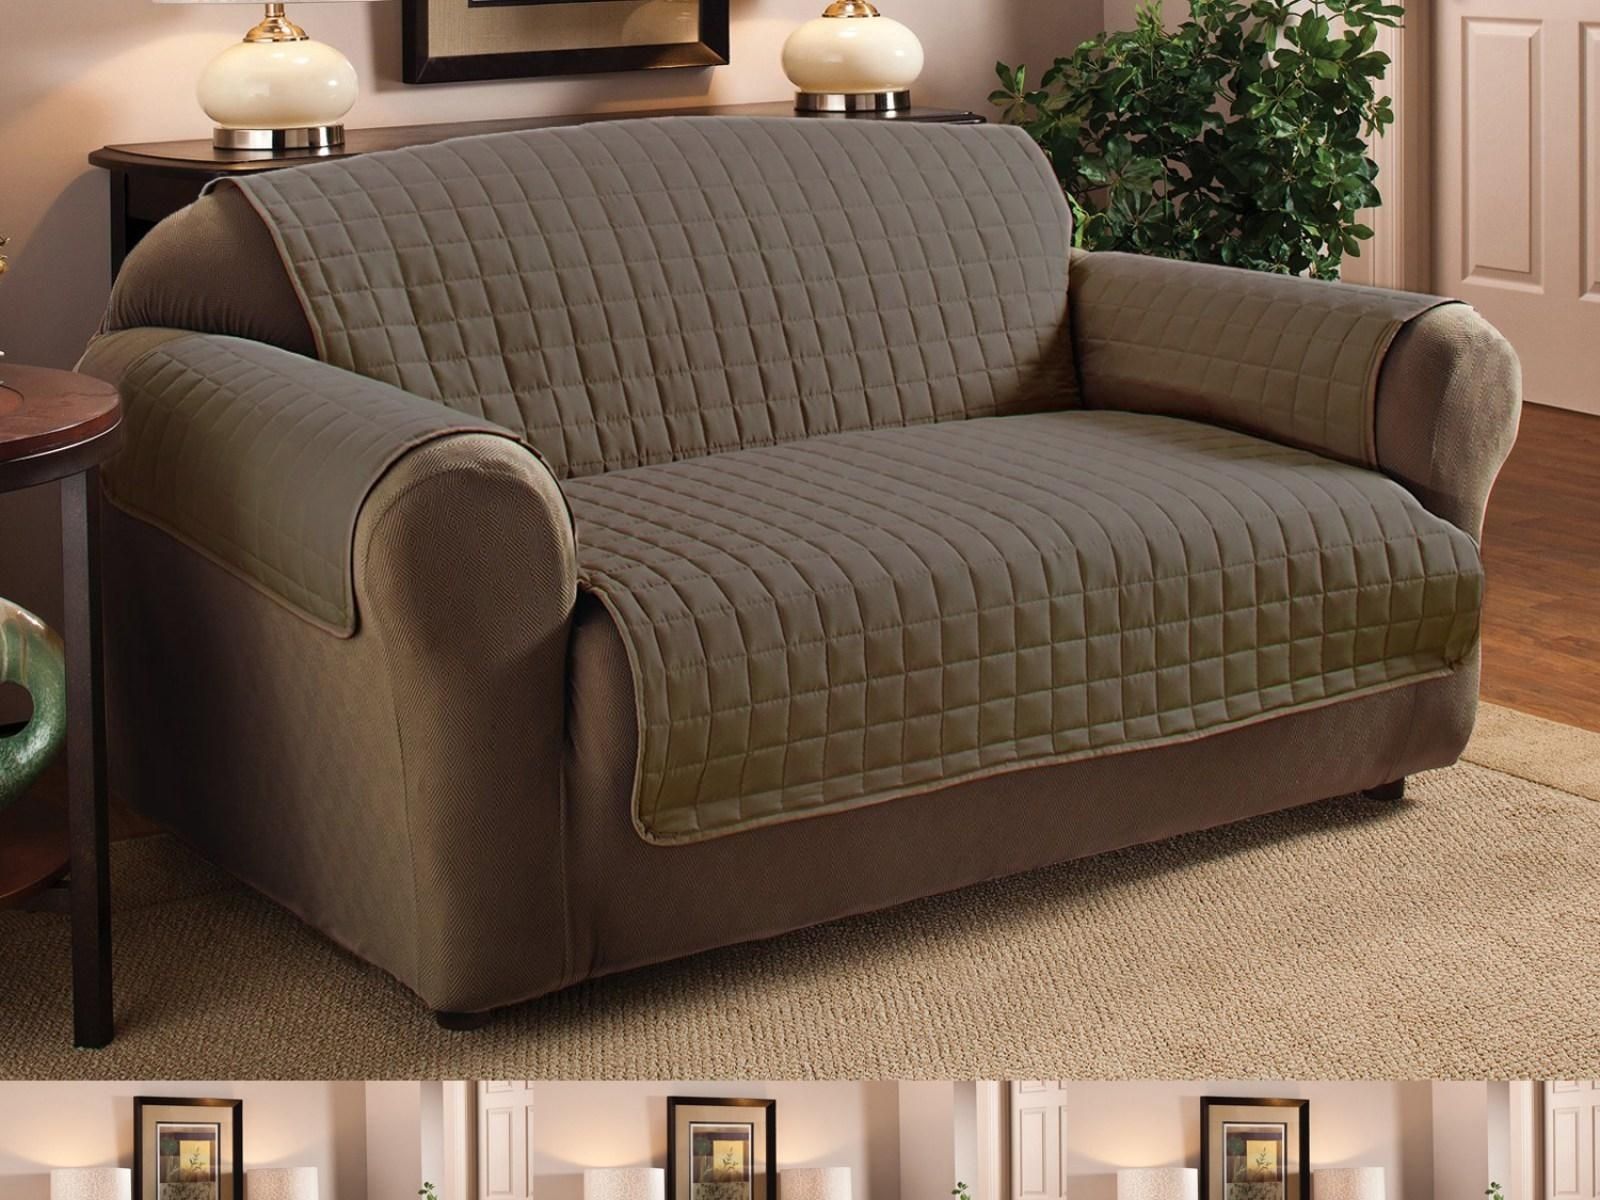 Furniture : Leather Couches Clearance Awesome Sectional Sofas San With Regard To Sectional Sofas In San Antonio (View 7 of 10)